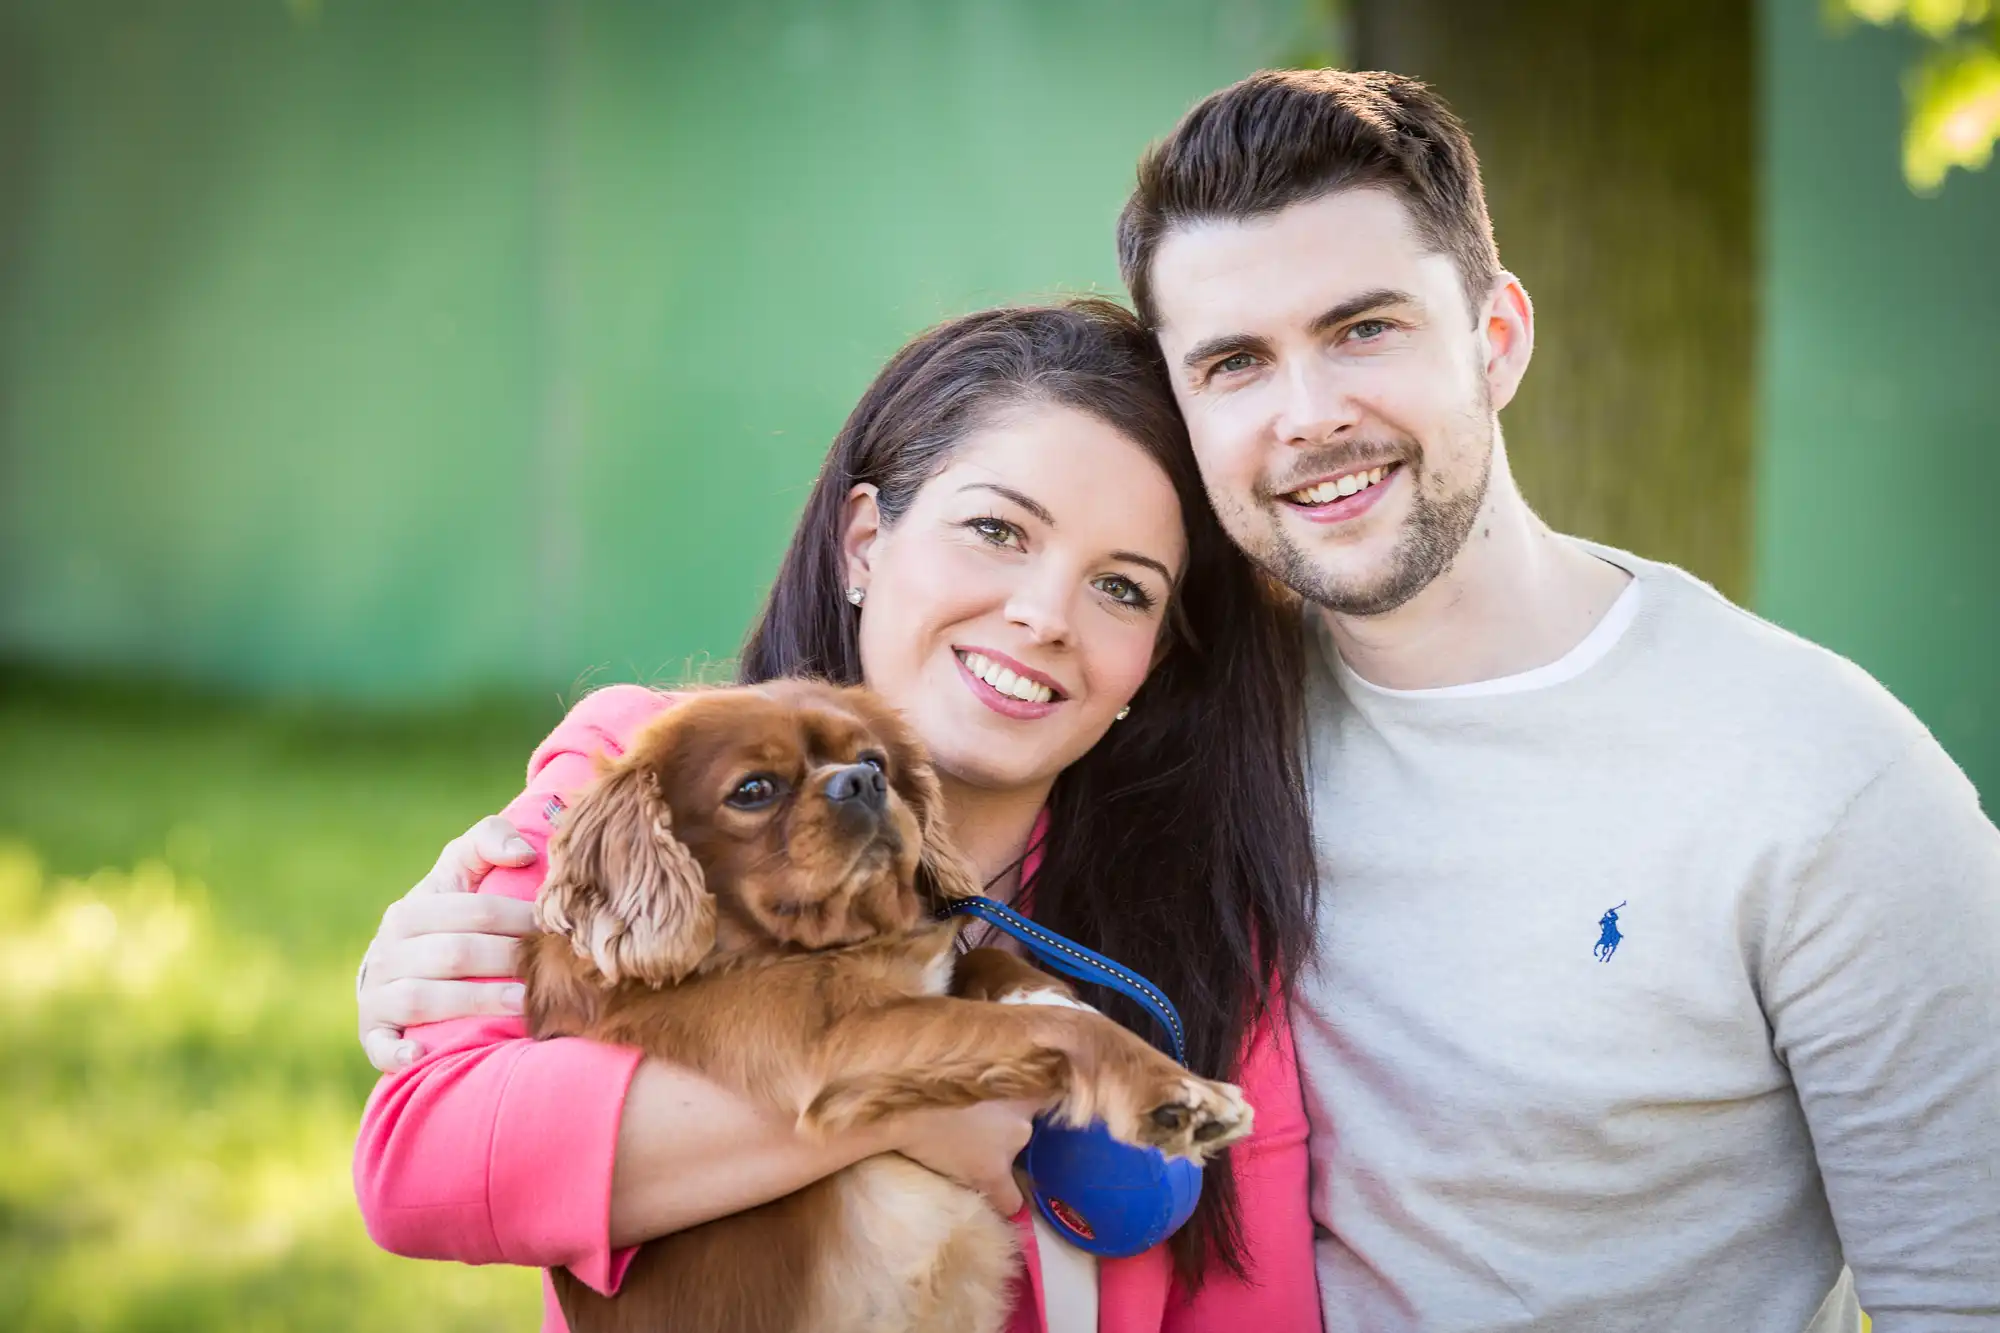 A young couple smiling, holding a small brown dog, standing outdoors in a sunlit park.